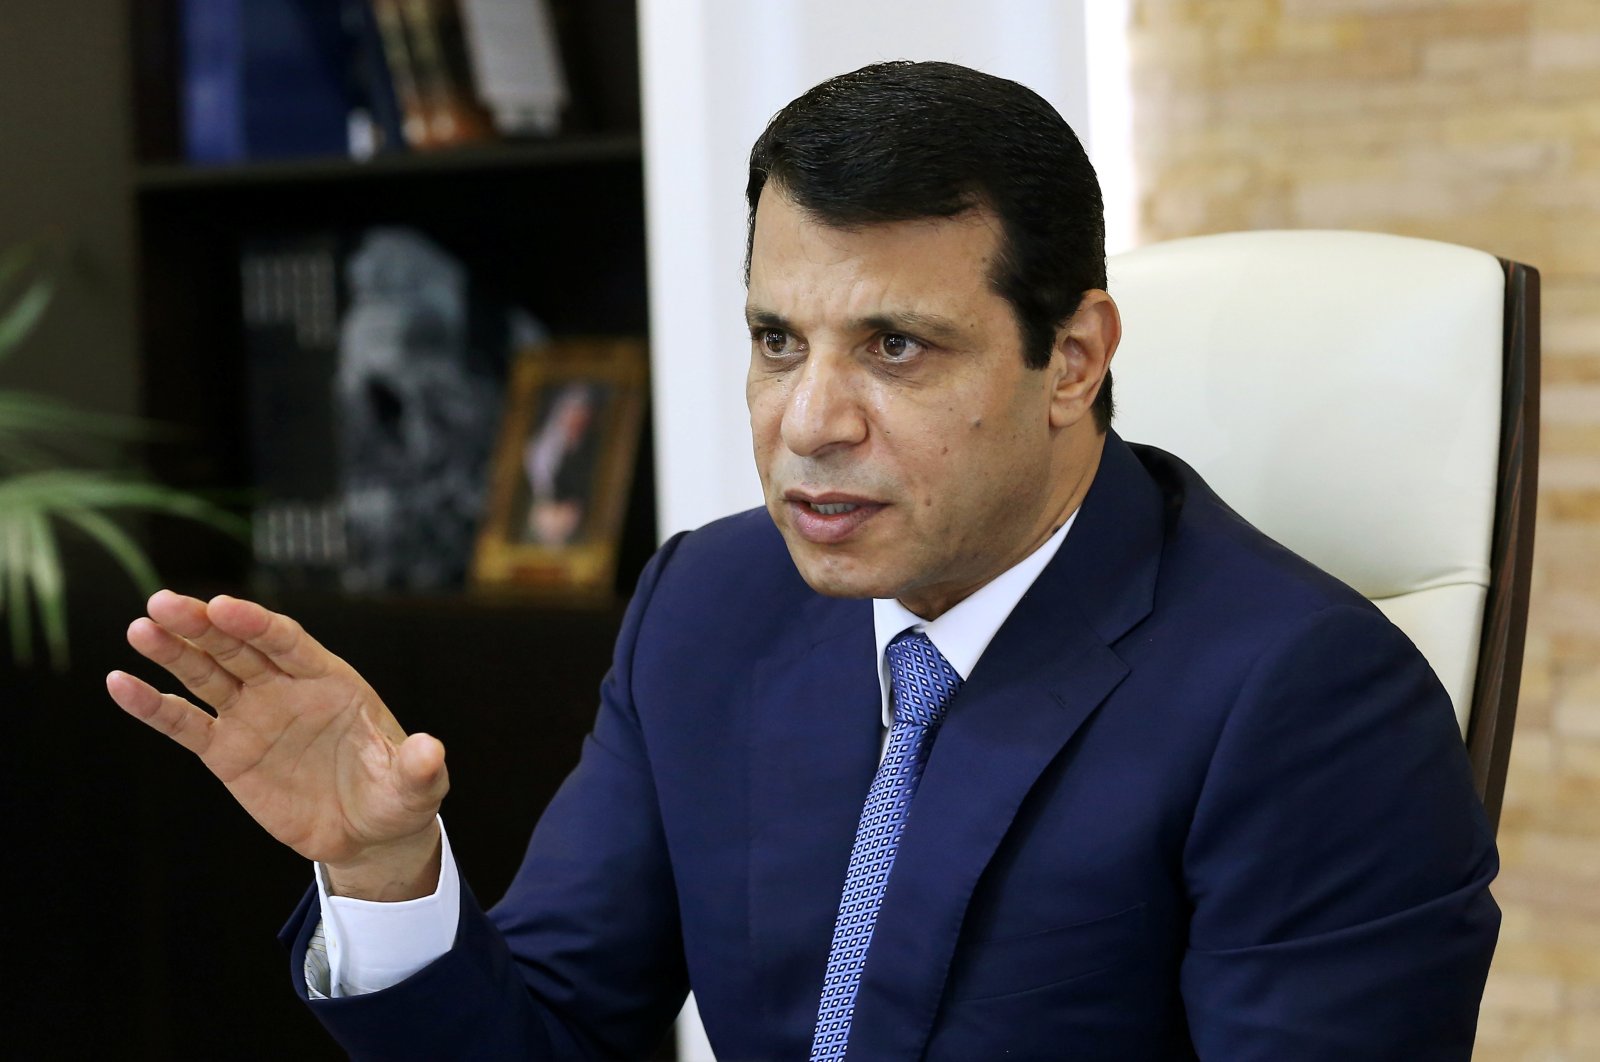 Mohammed Dahlan gestures in his office in Abu Dhabi, United Arab Emirates, Oct. 18, 2016. (Reuters File Photo)